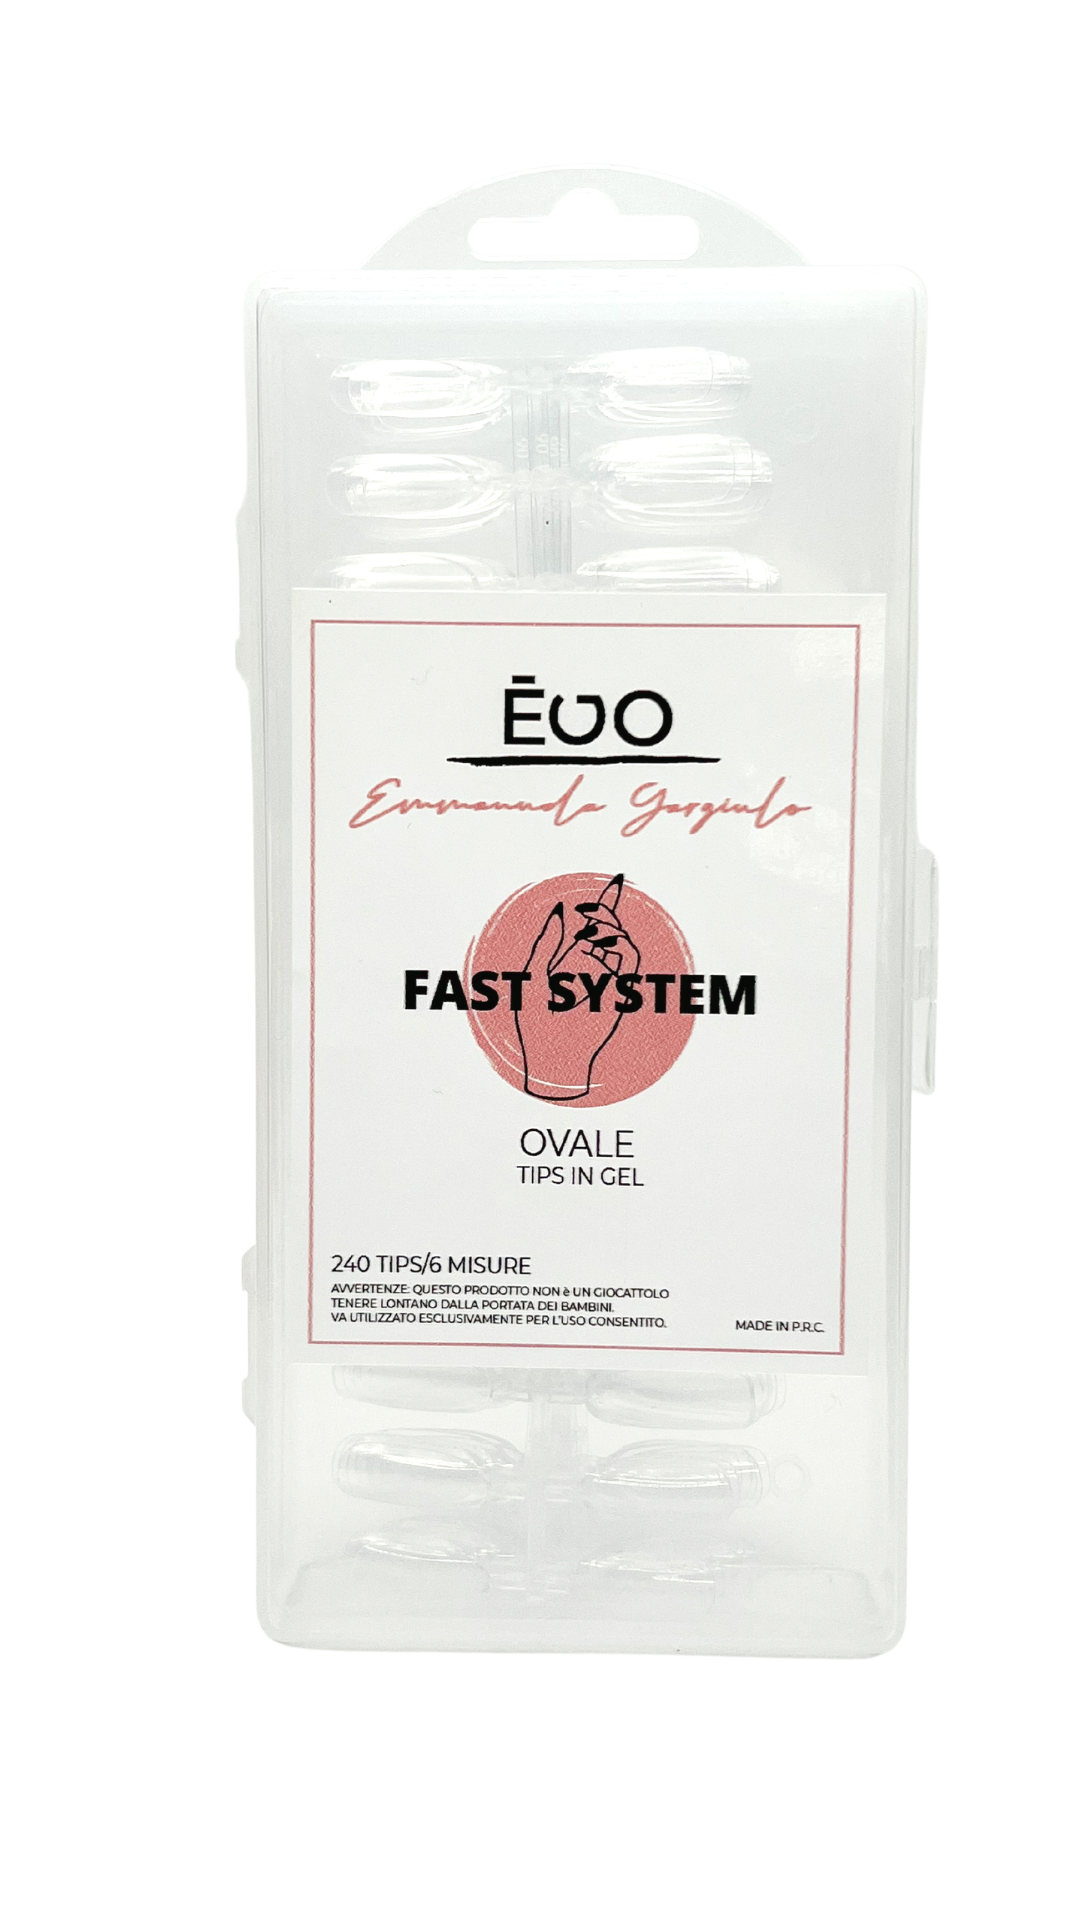 OVAL FAST SYSTEM